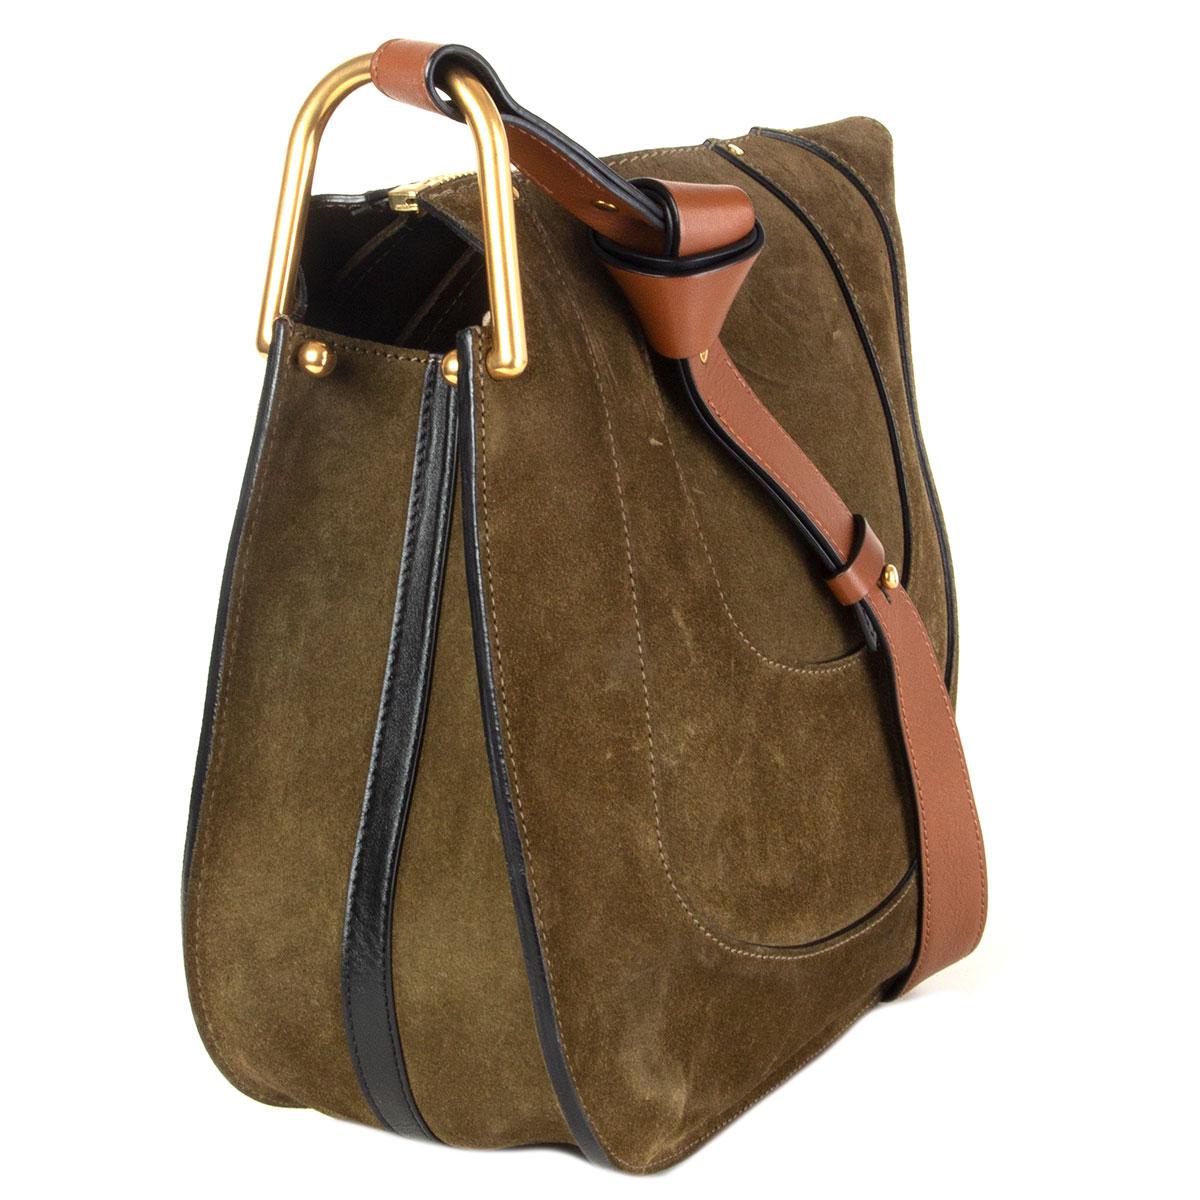 authentic Chloé Hayley hobo in Eucalyptus (olive green) suede featuring gold-tone hardware. Has a curved base and horseshoe stitching. Opens with a chain-zipper on top to a spacious interior with a big central zipped compartment with one open pocket